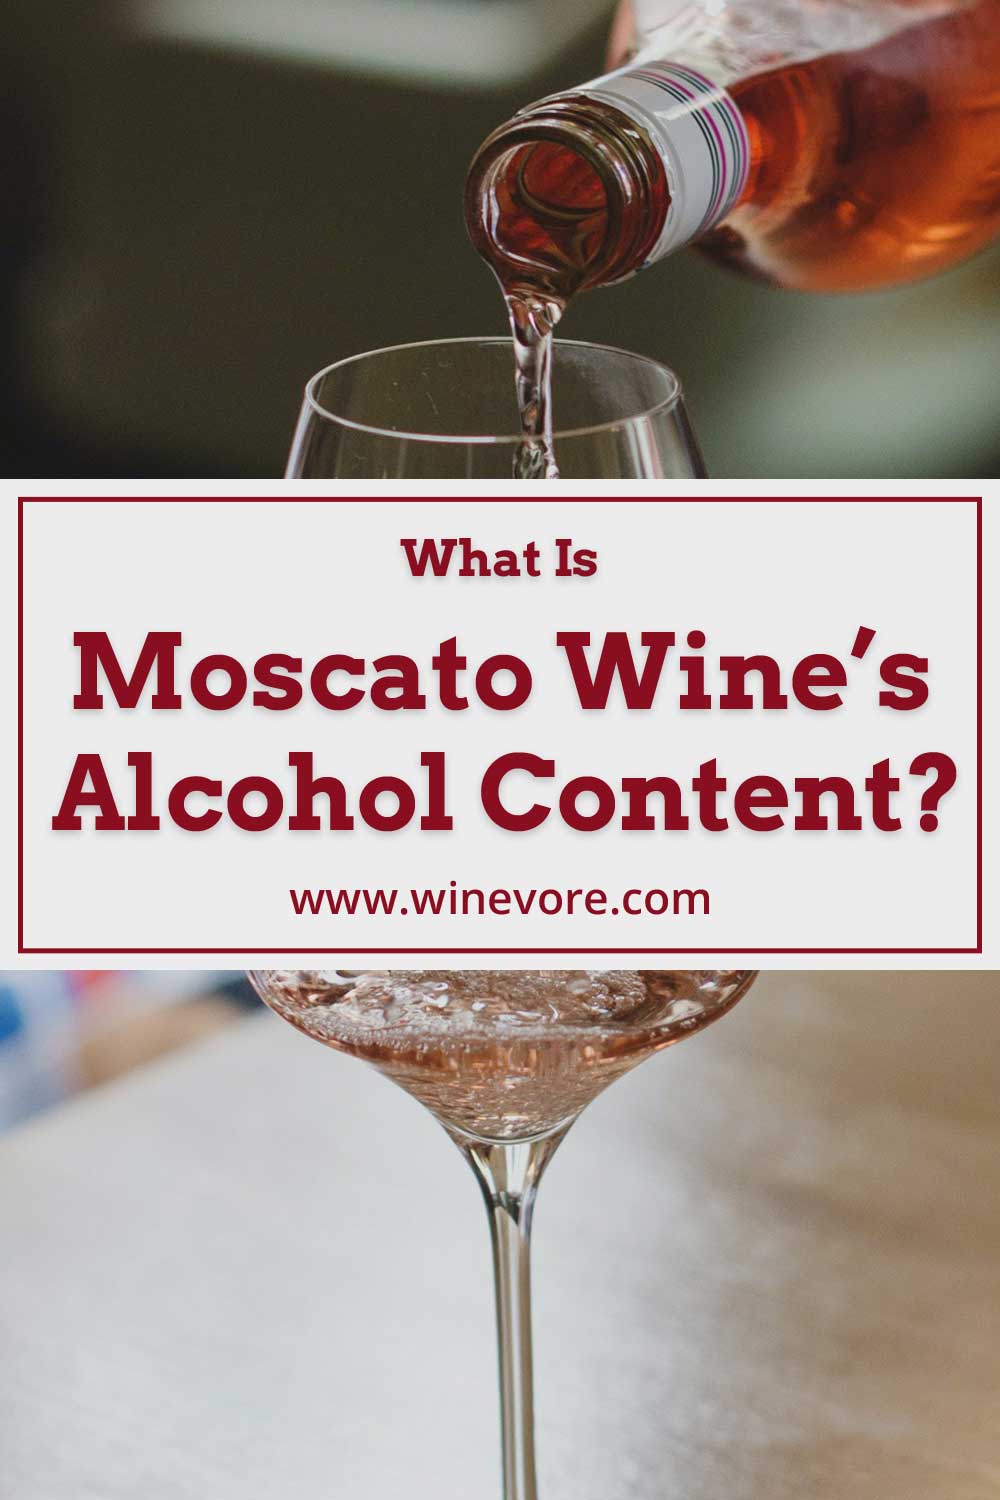 Pouring moscato from a bottle into a glass - what is its alcohol content?